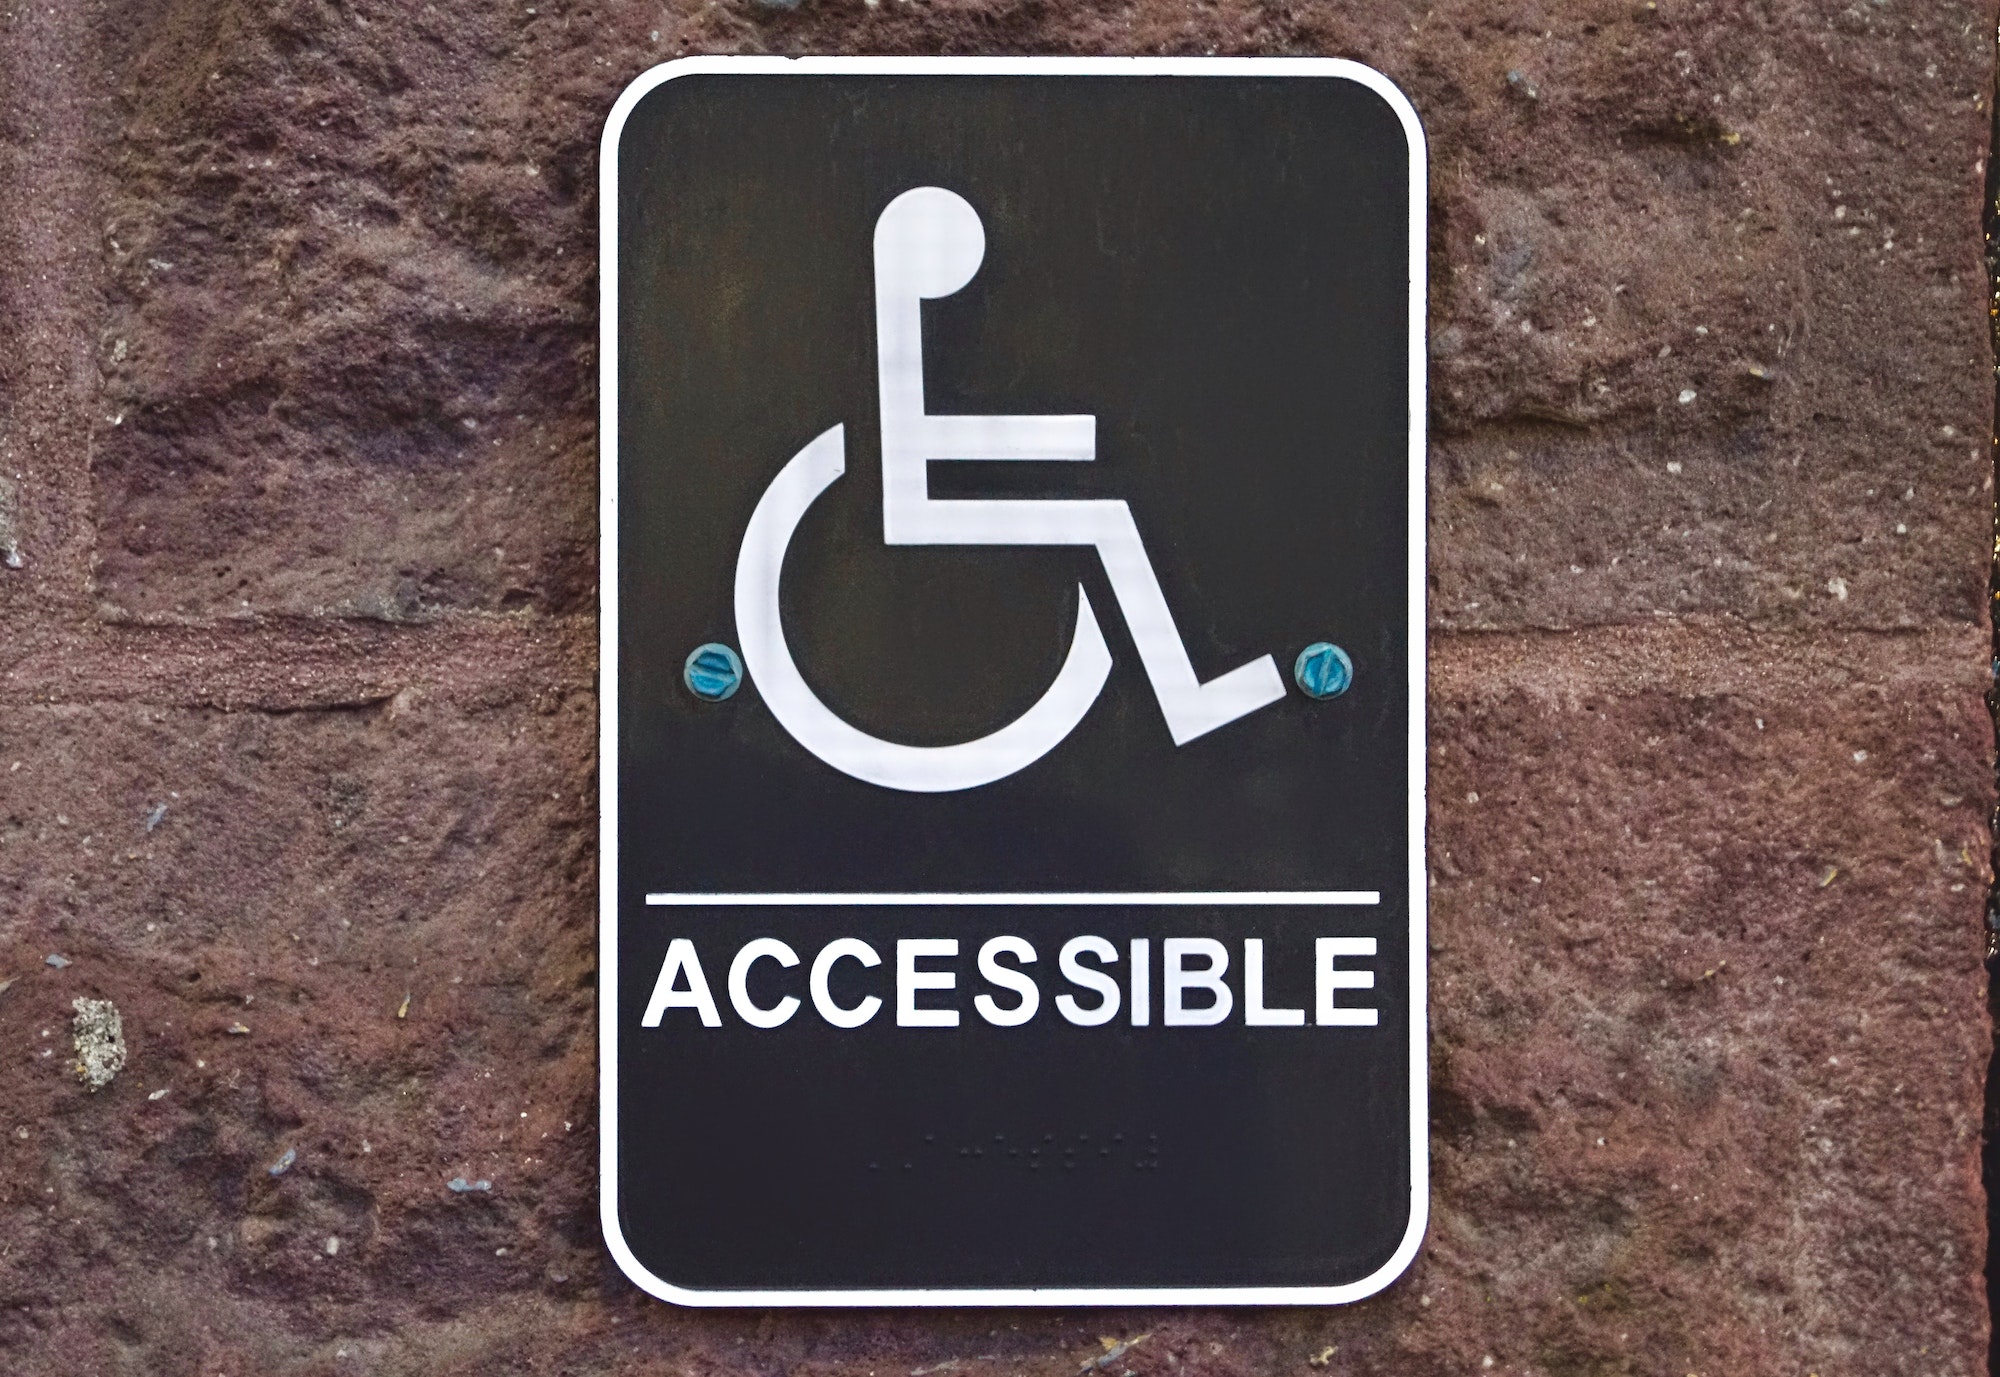 Wheelchair accessible. tonythetigersson, Tony Andrews Photography.